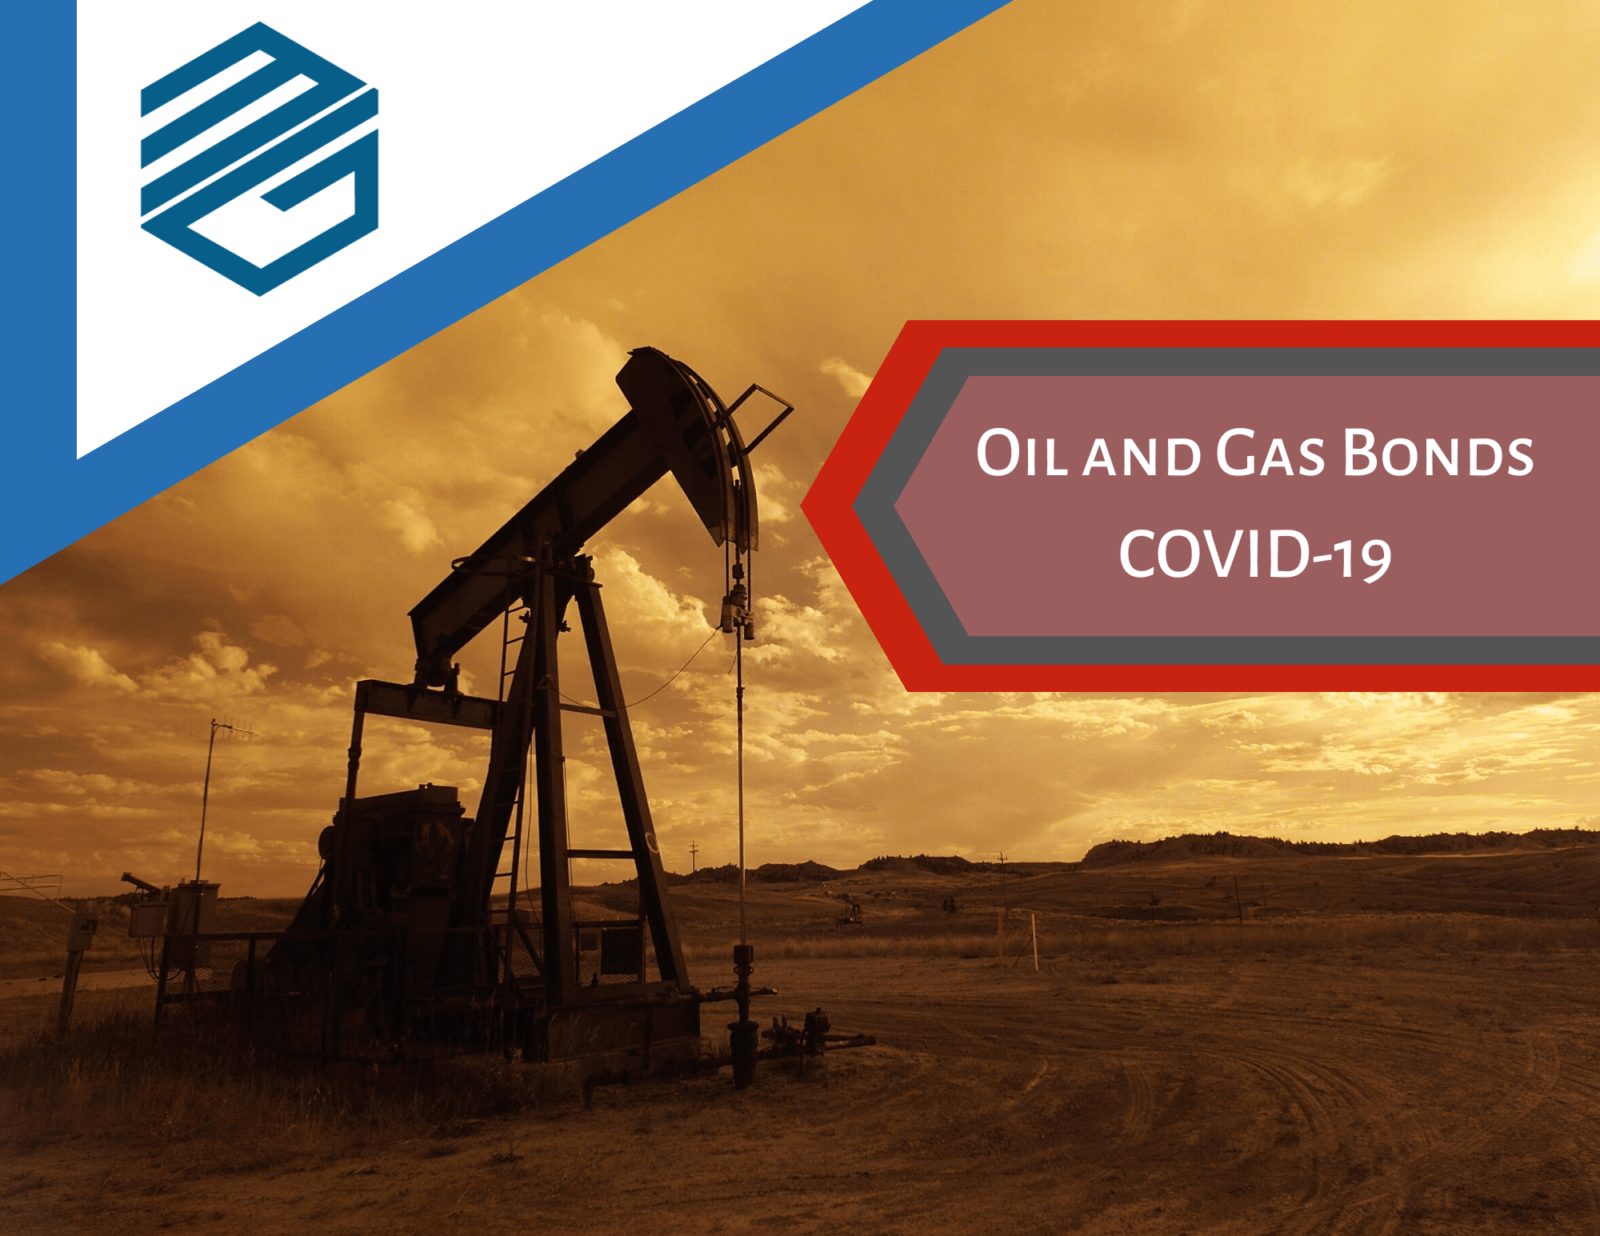 Oil and Gas Bonds. Oil rig during sunset with Oil and Gas Bond During COVID-19 on it